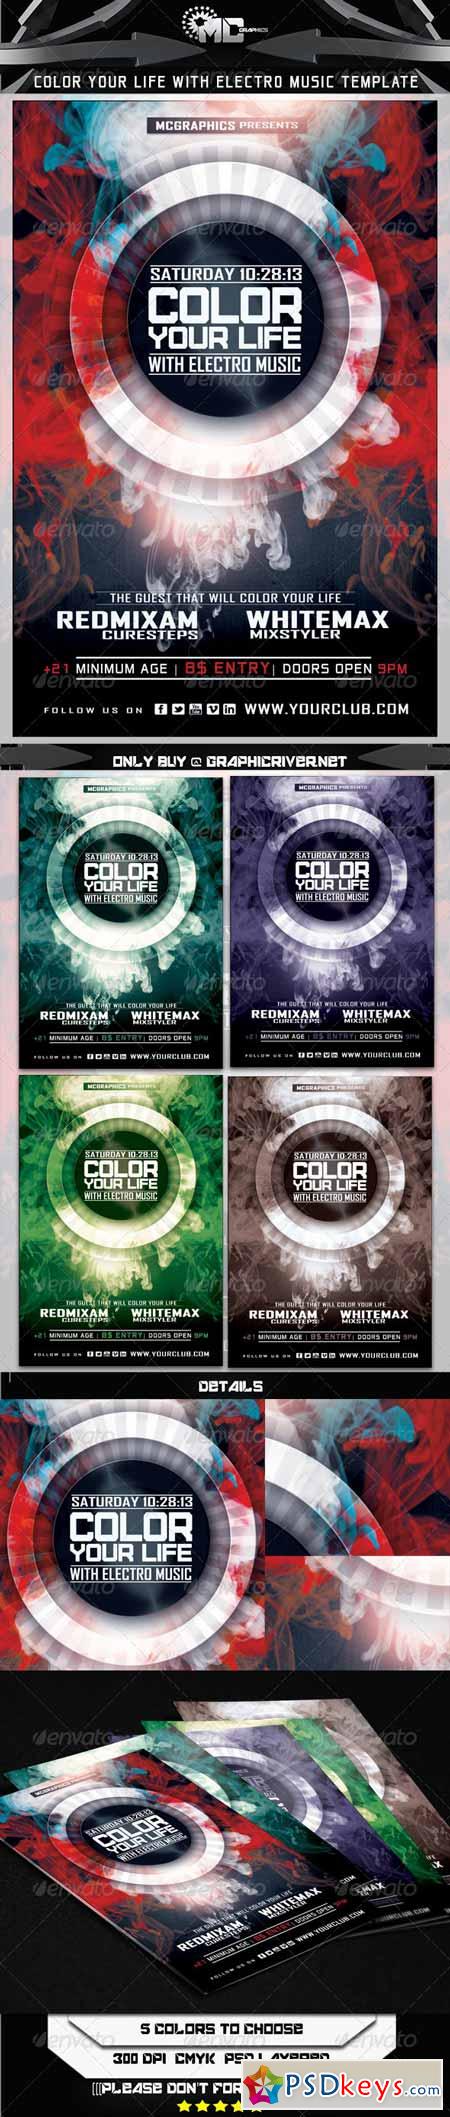 Color Your Life With Electro Music Flyer Template 5526033